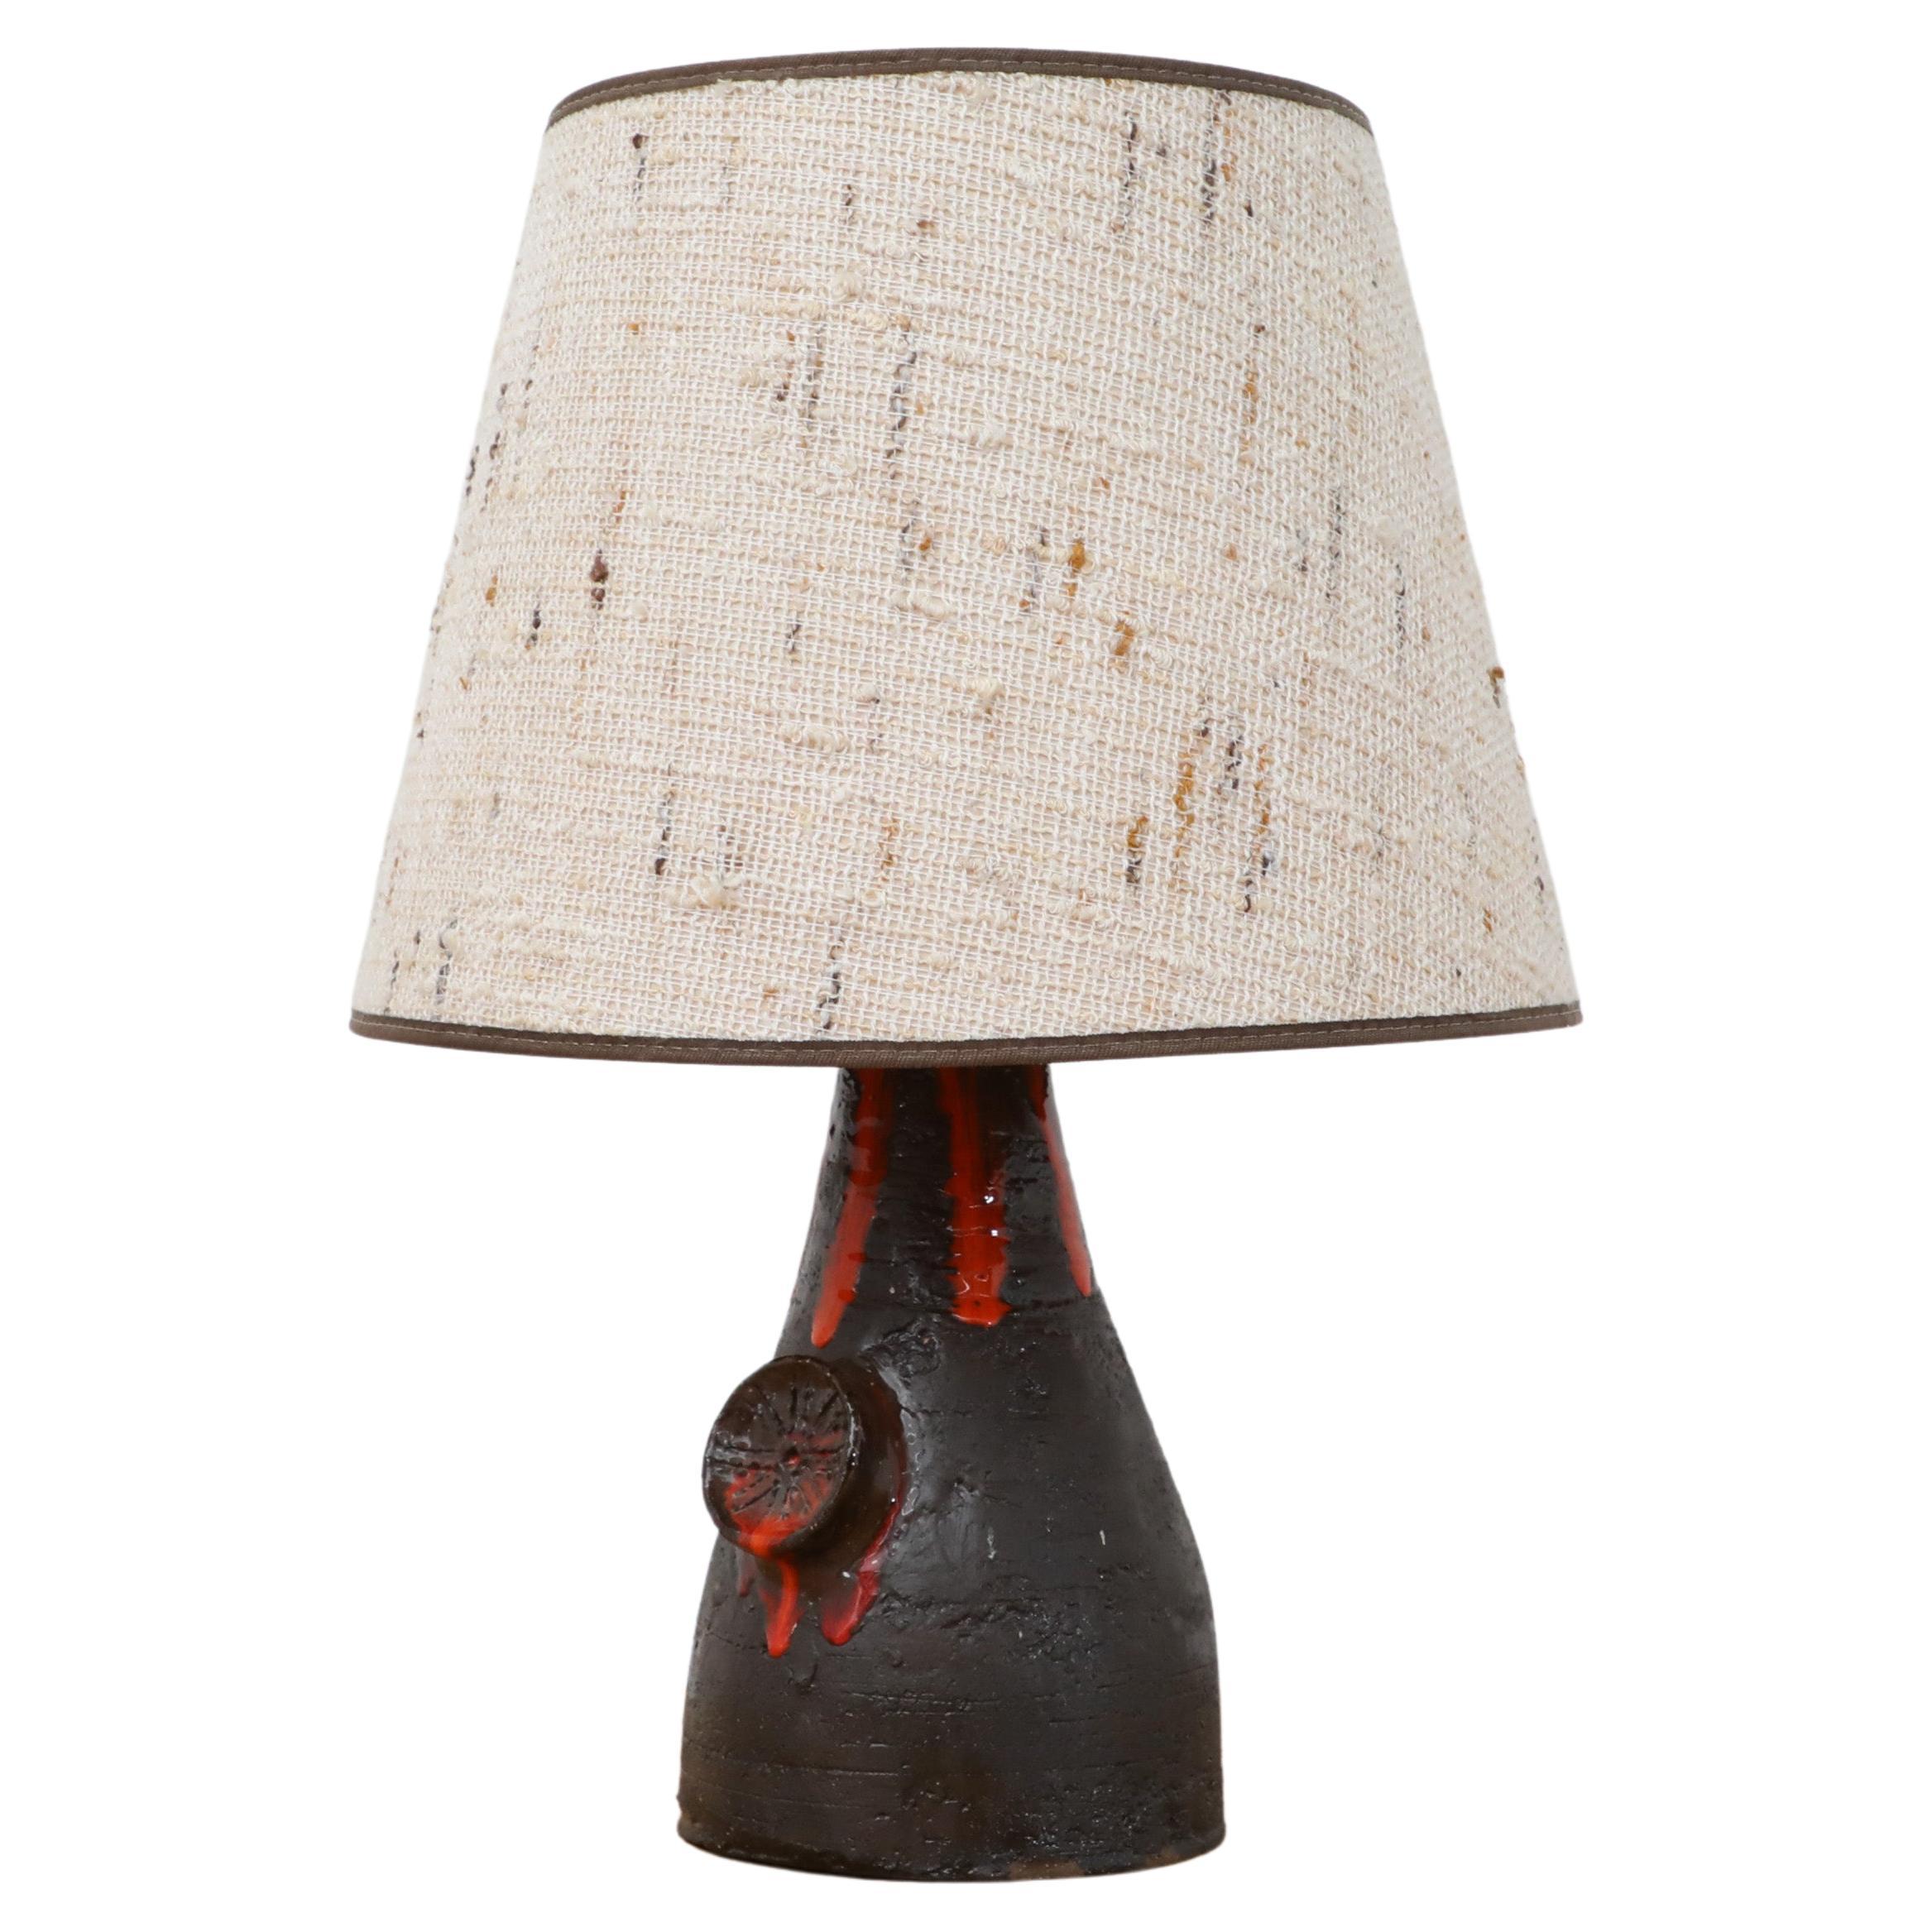 Dutch Mid-Century Black Ceramic Volcanic Table Lamp w/ Red Dripping Effect Glaze For Sale